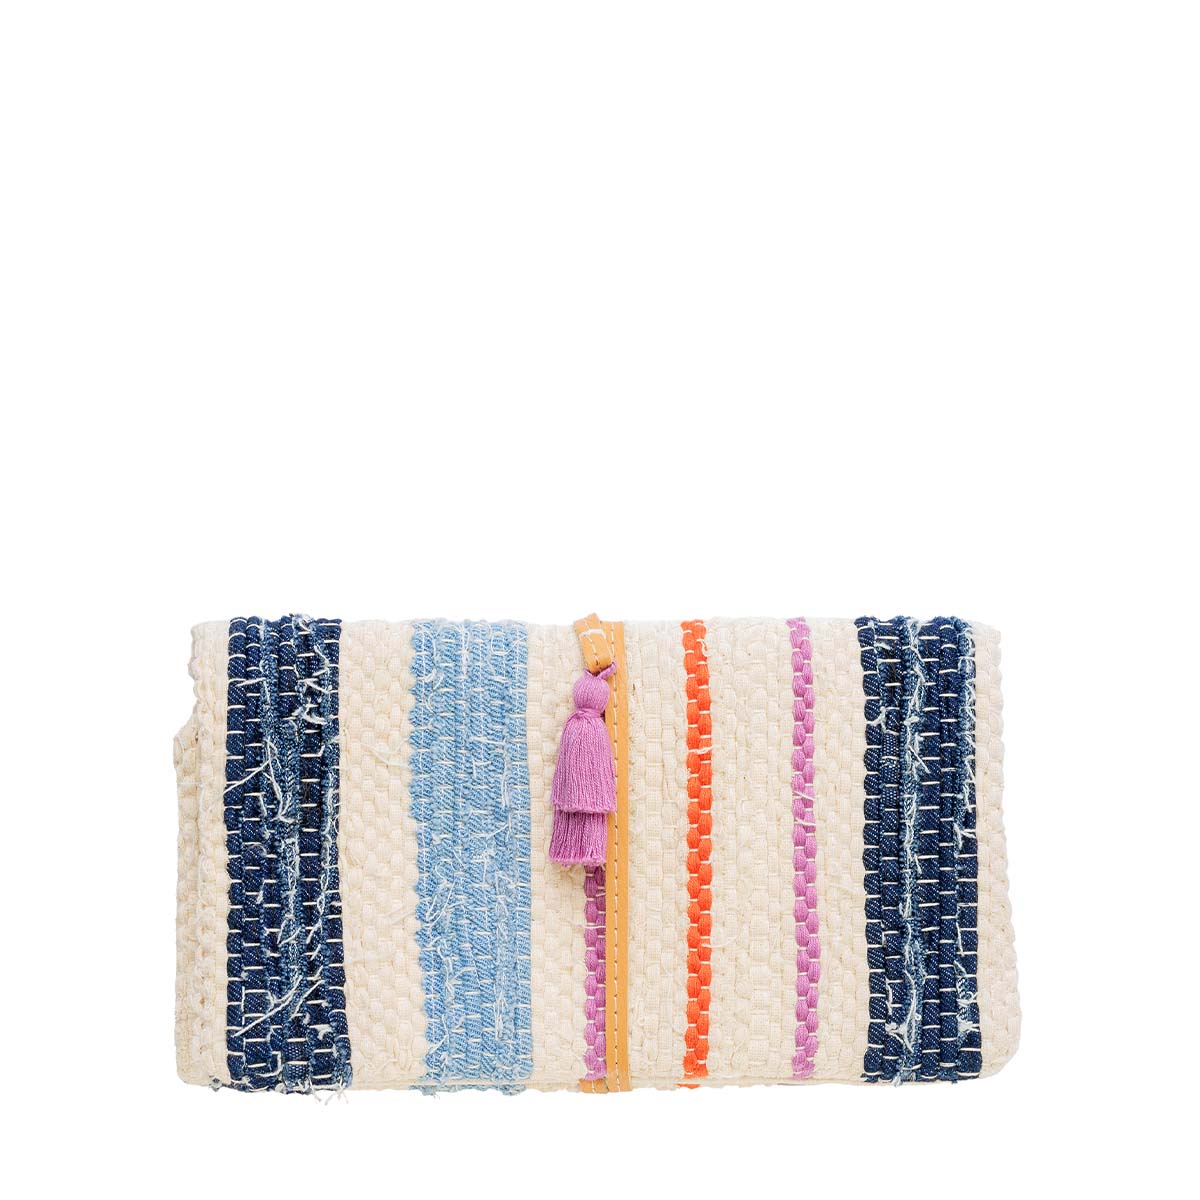 The front of the hand woven artisan Rebeca Tech Case in Spring Sherbert. It has vertical dark blue, sky blue, pink, and orange woven stripes. It is wrapped in a leather cord with a pink tassel.